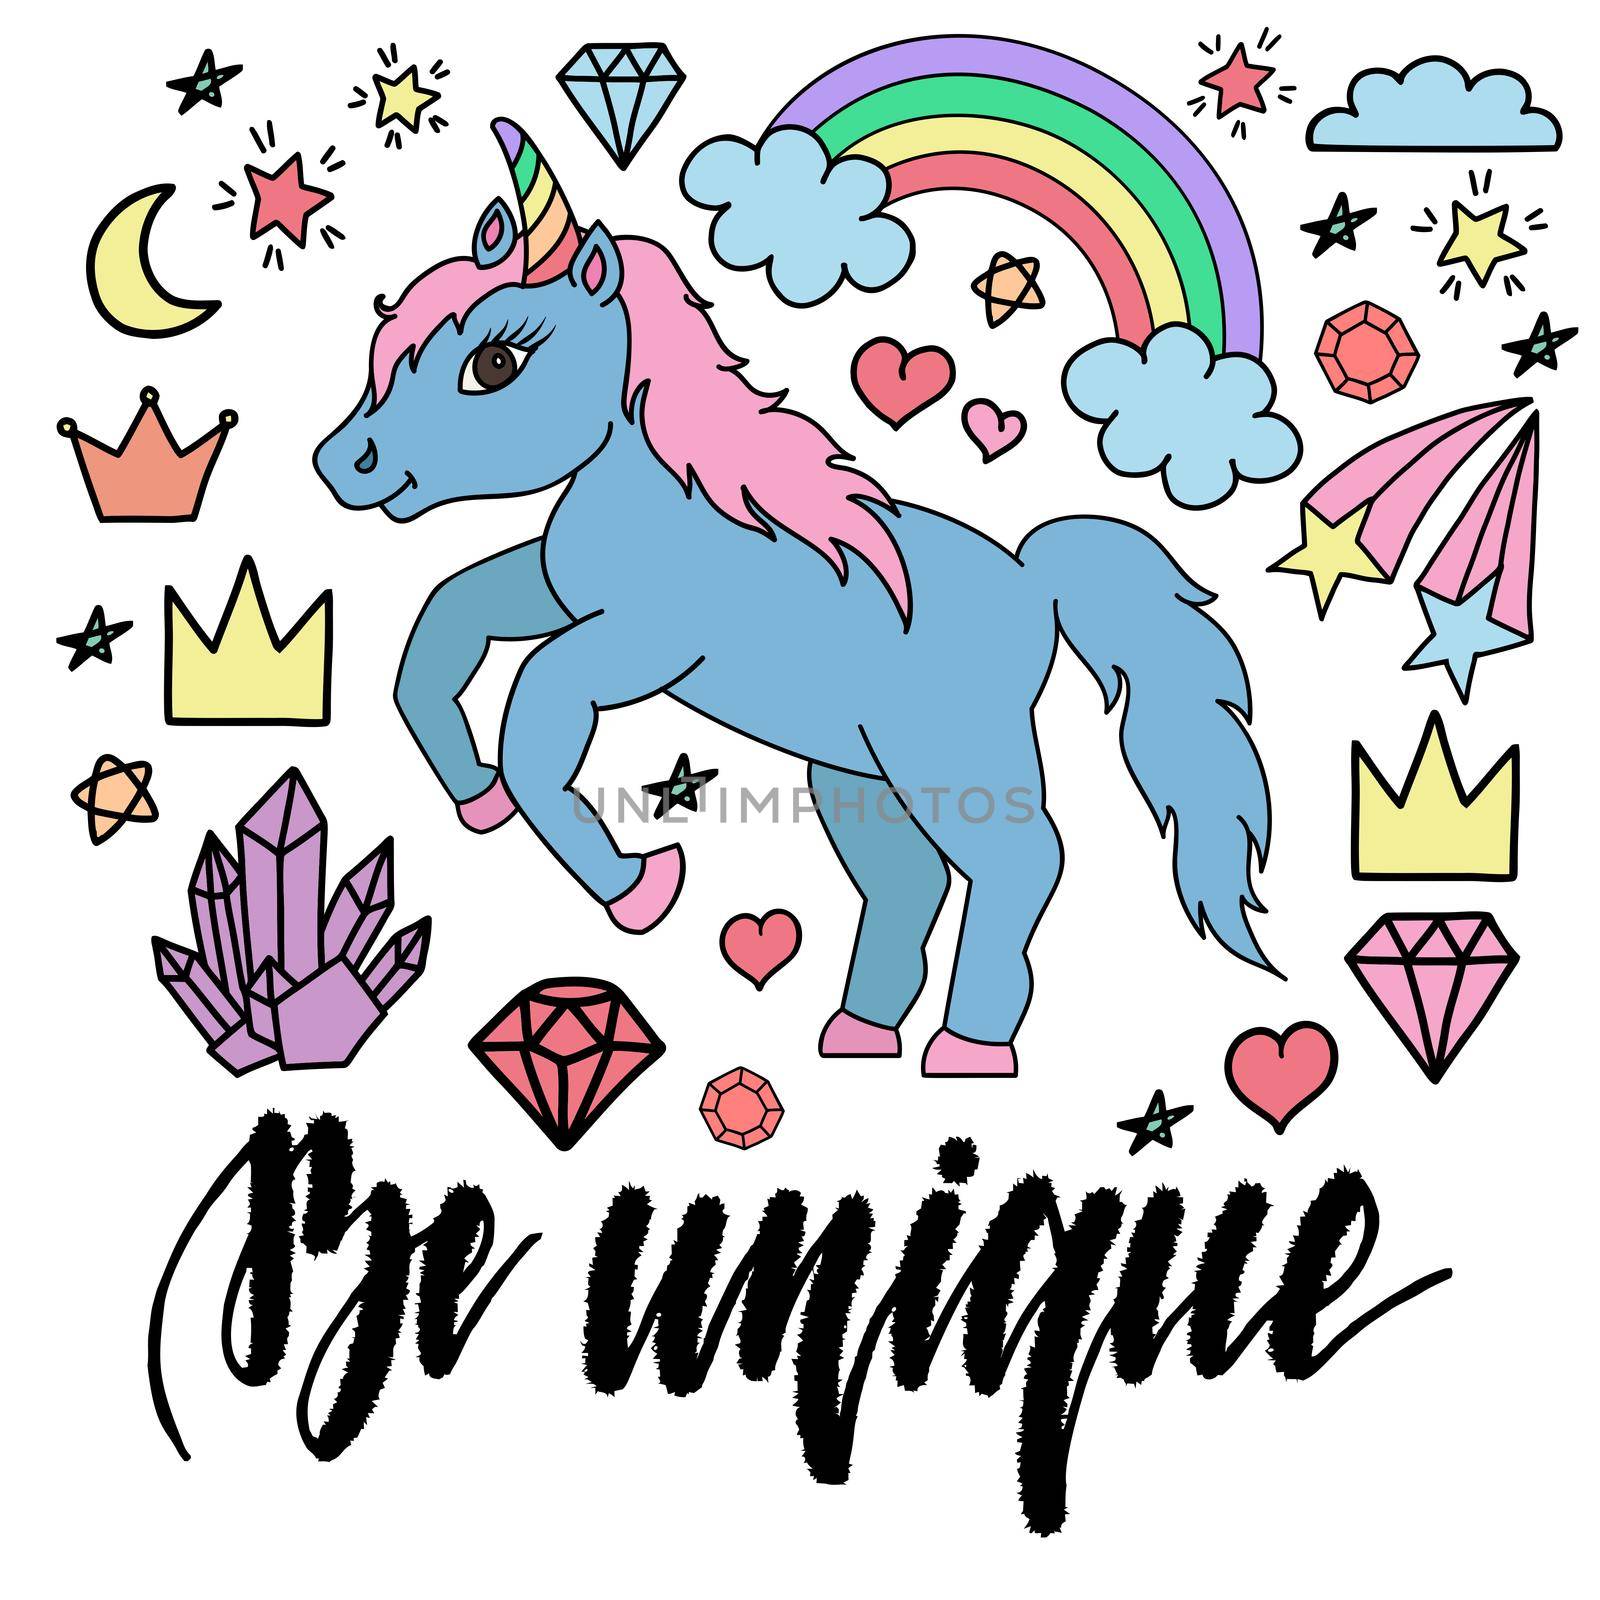 Cute unicorns and other elements. Set of illustrations in hand drawn, doodle style isolated on white background.